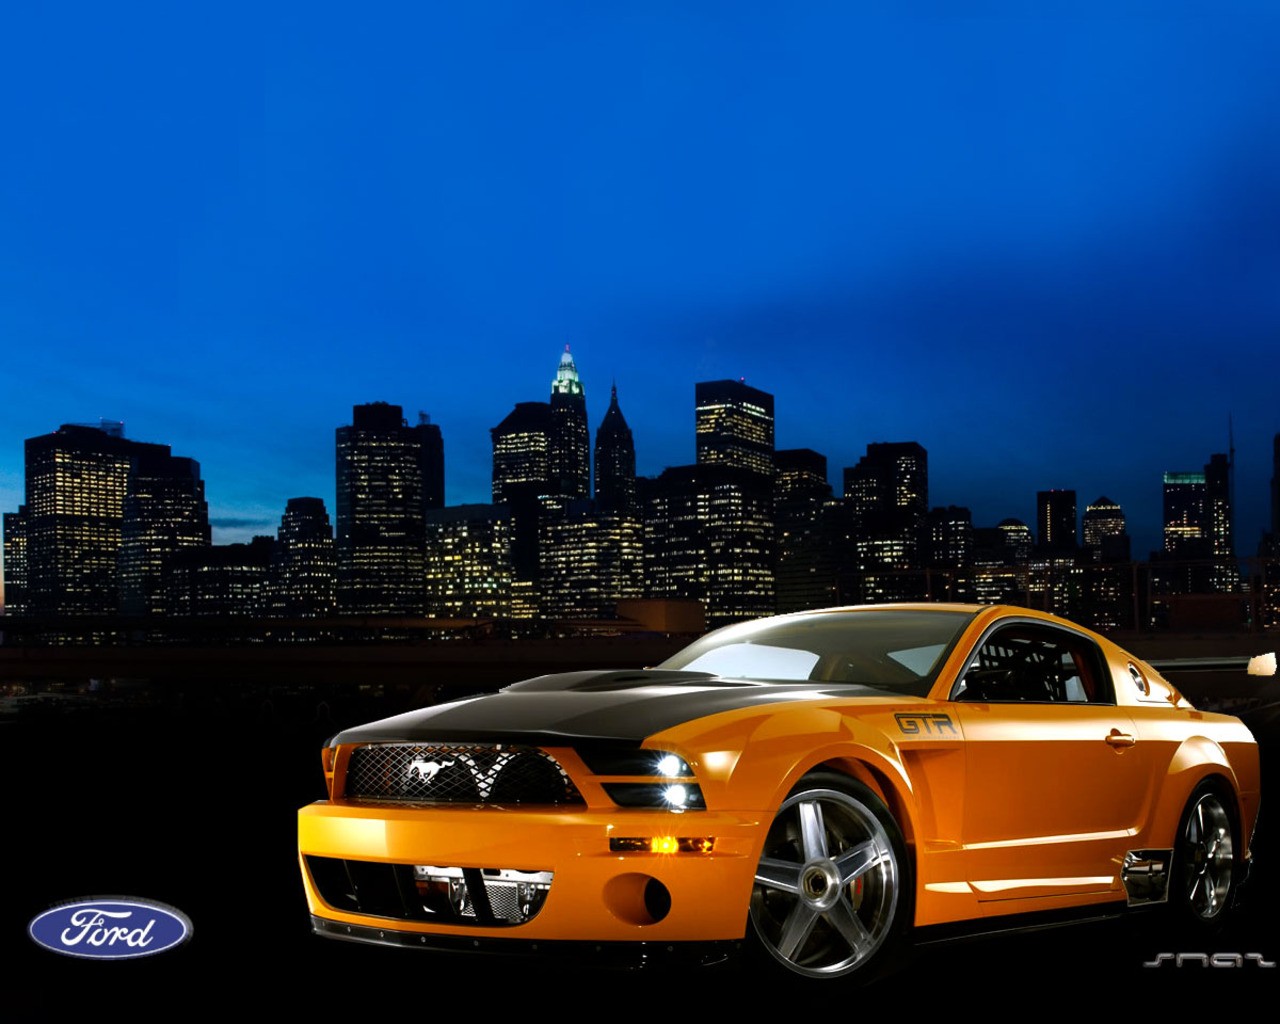 Ford Mustang на фоне города